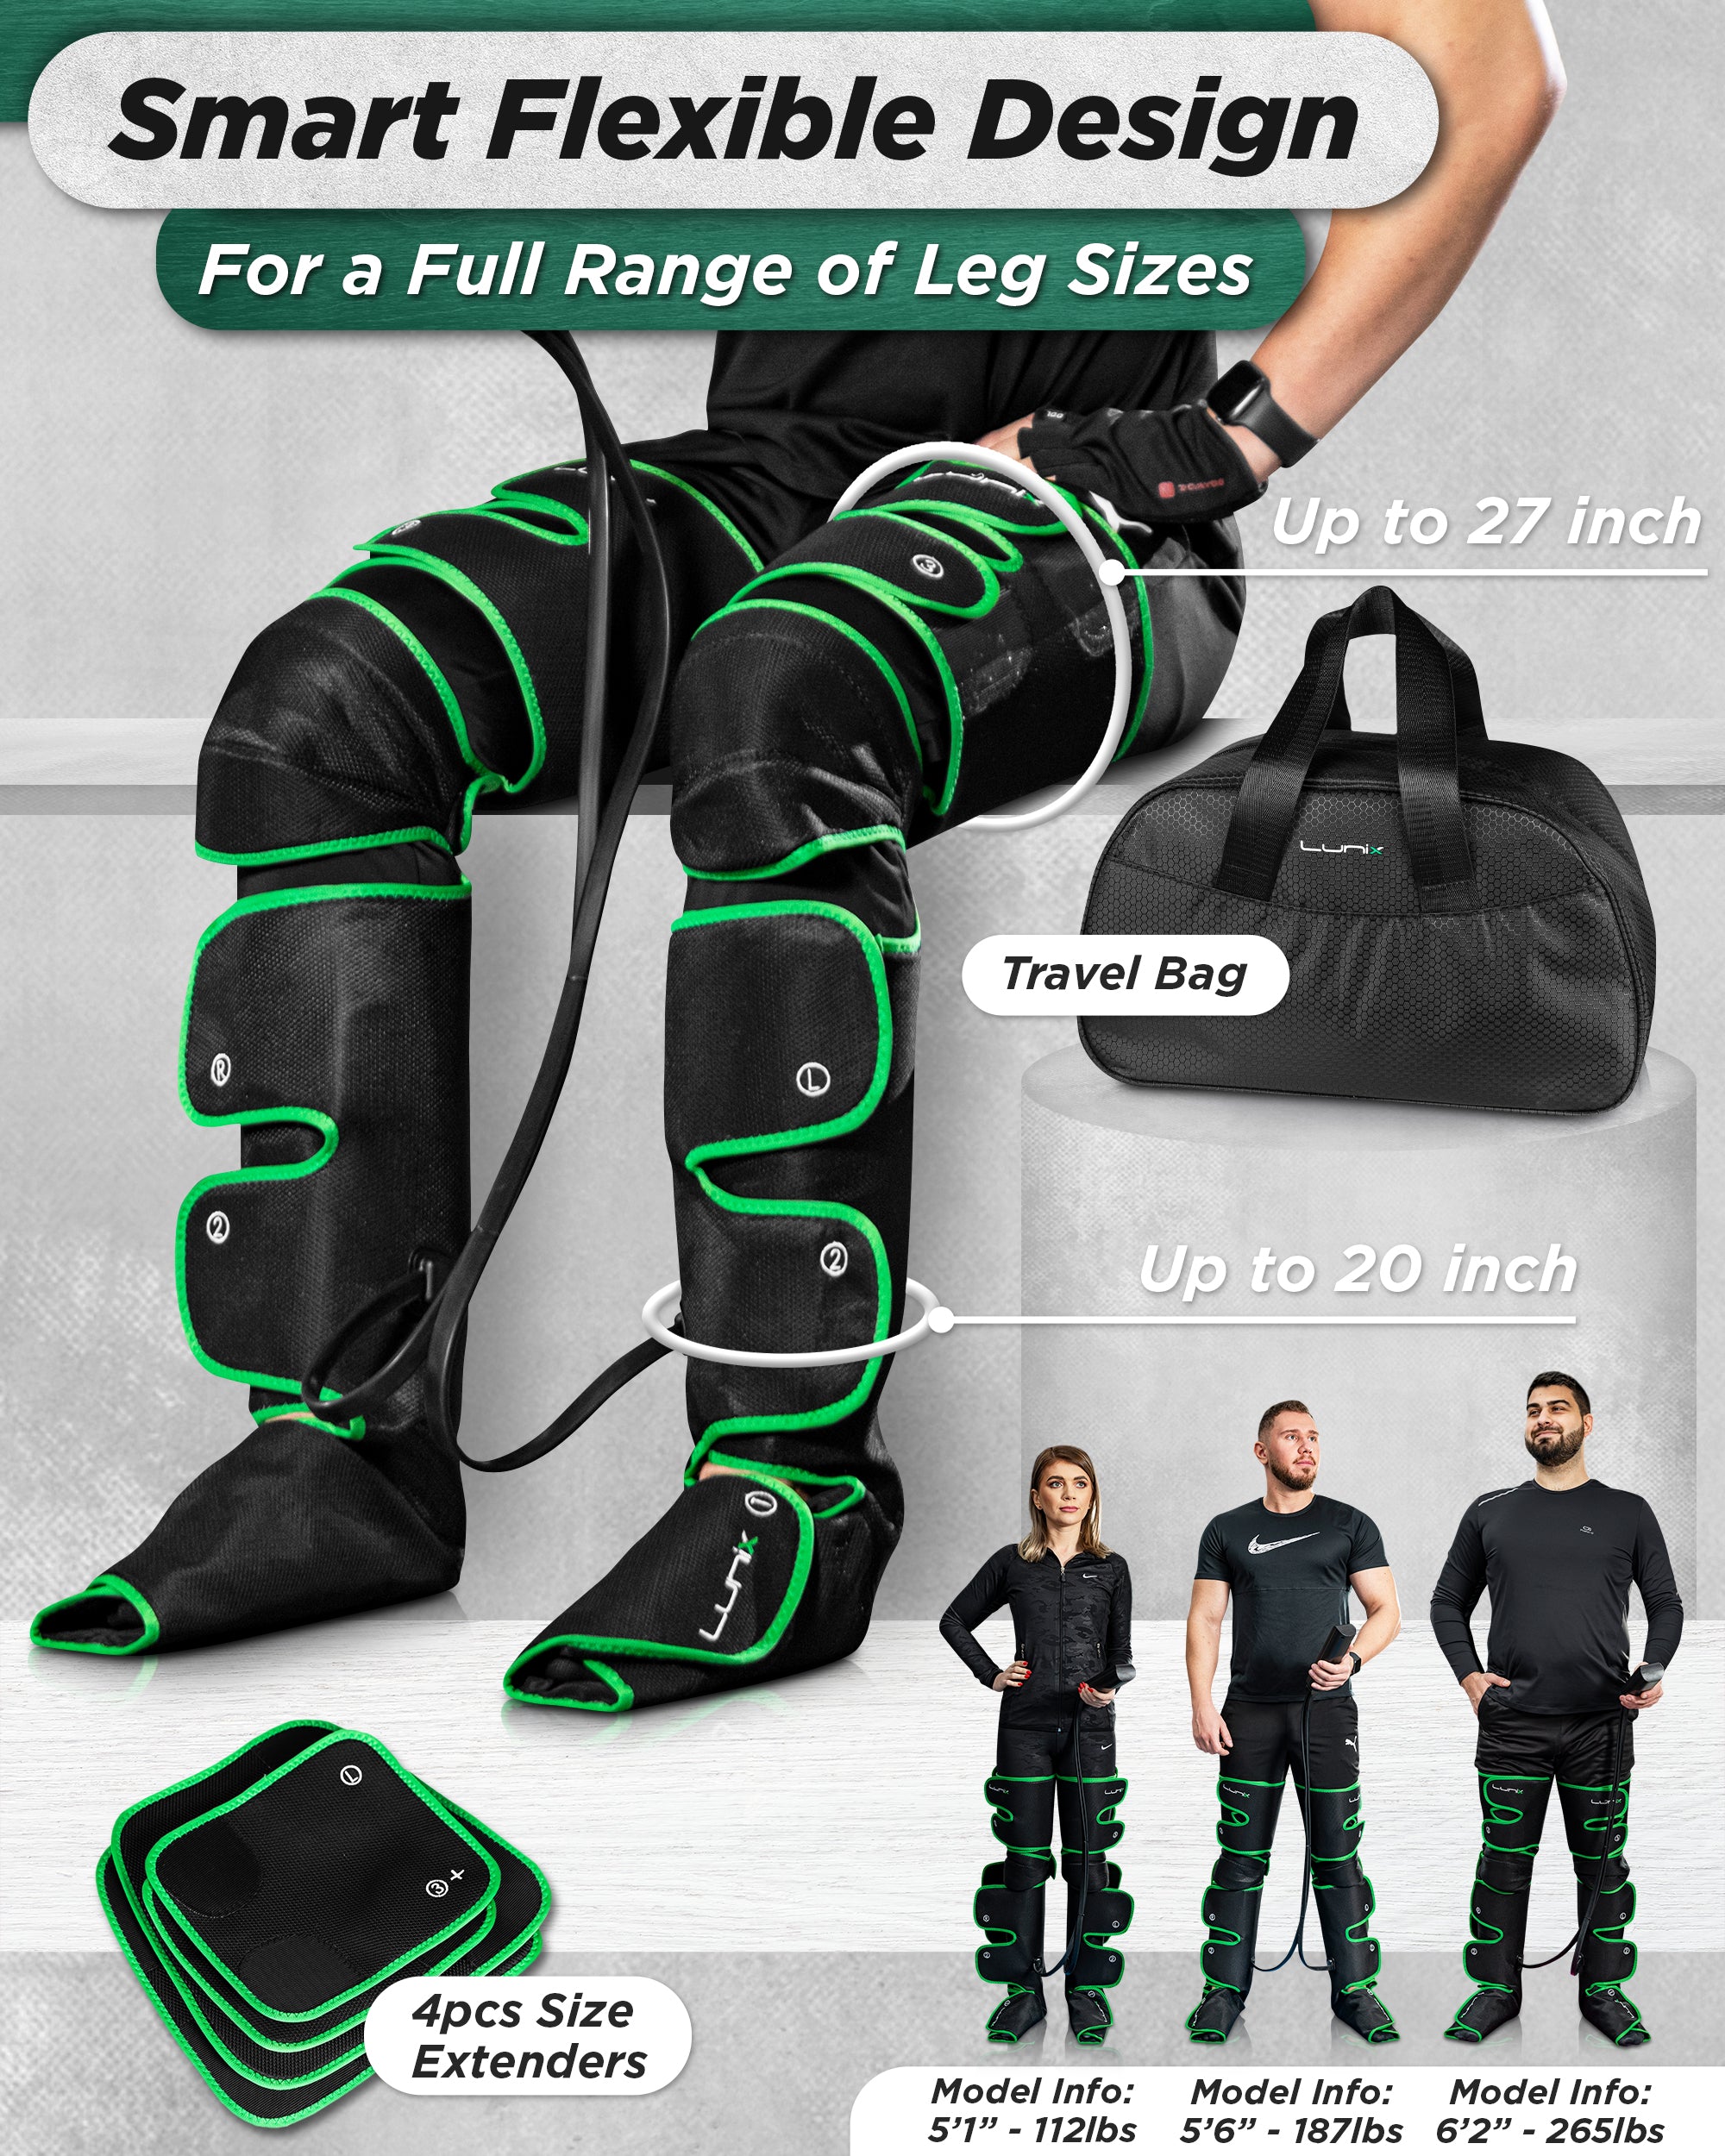 LUNIX LX10 FULL LEG COMPRESSION MASSAGER, WITH HOT/COLD PACK - GREEN